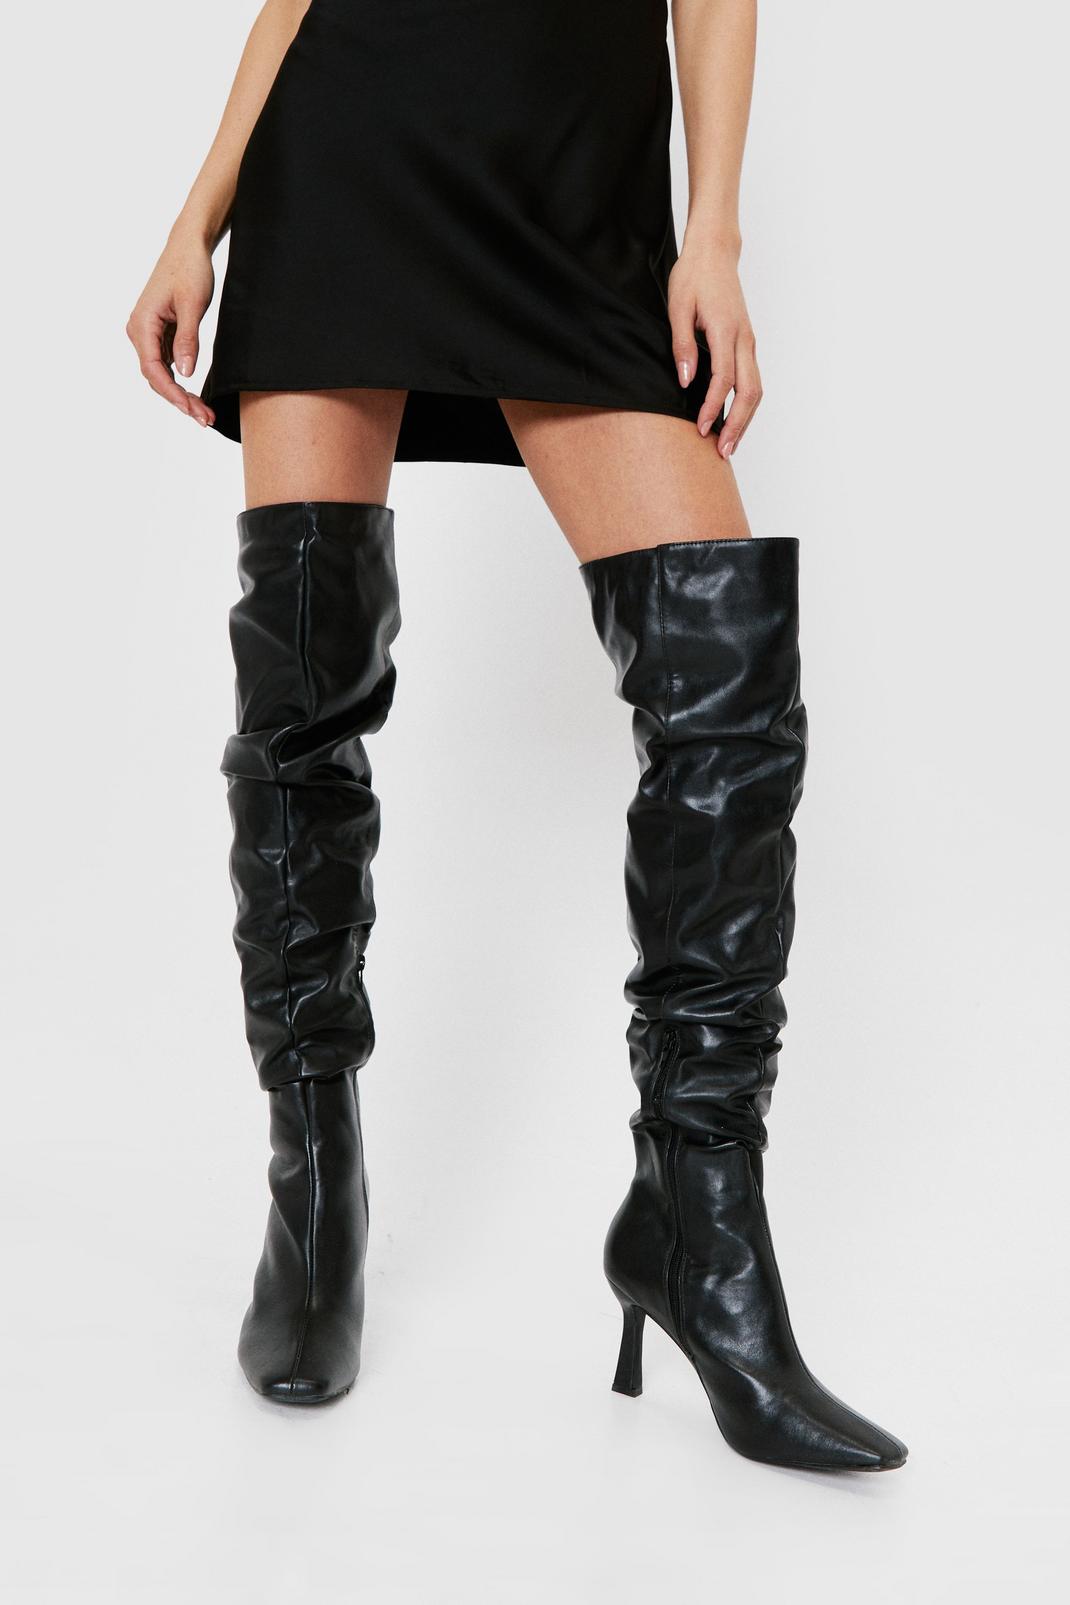 Black Thigh High Slouchy Stiletto Heel Boots image number 1